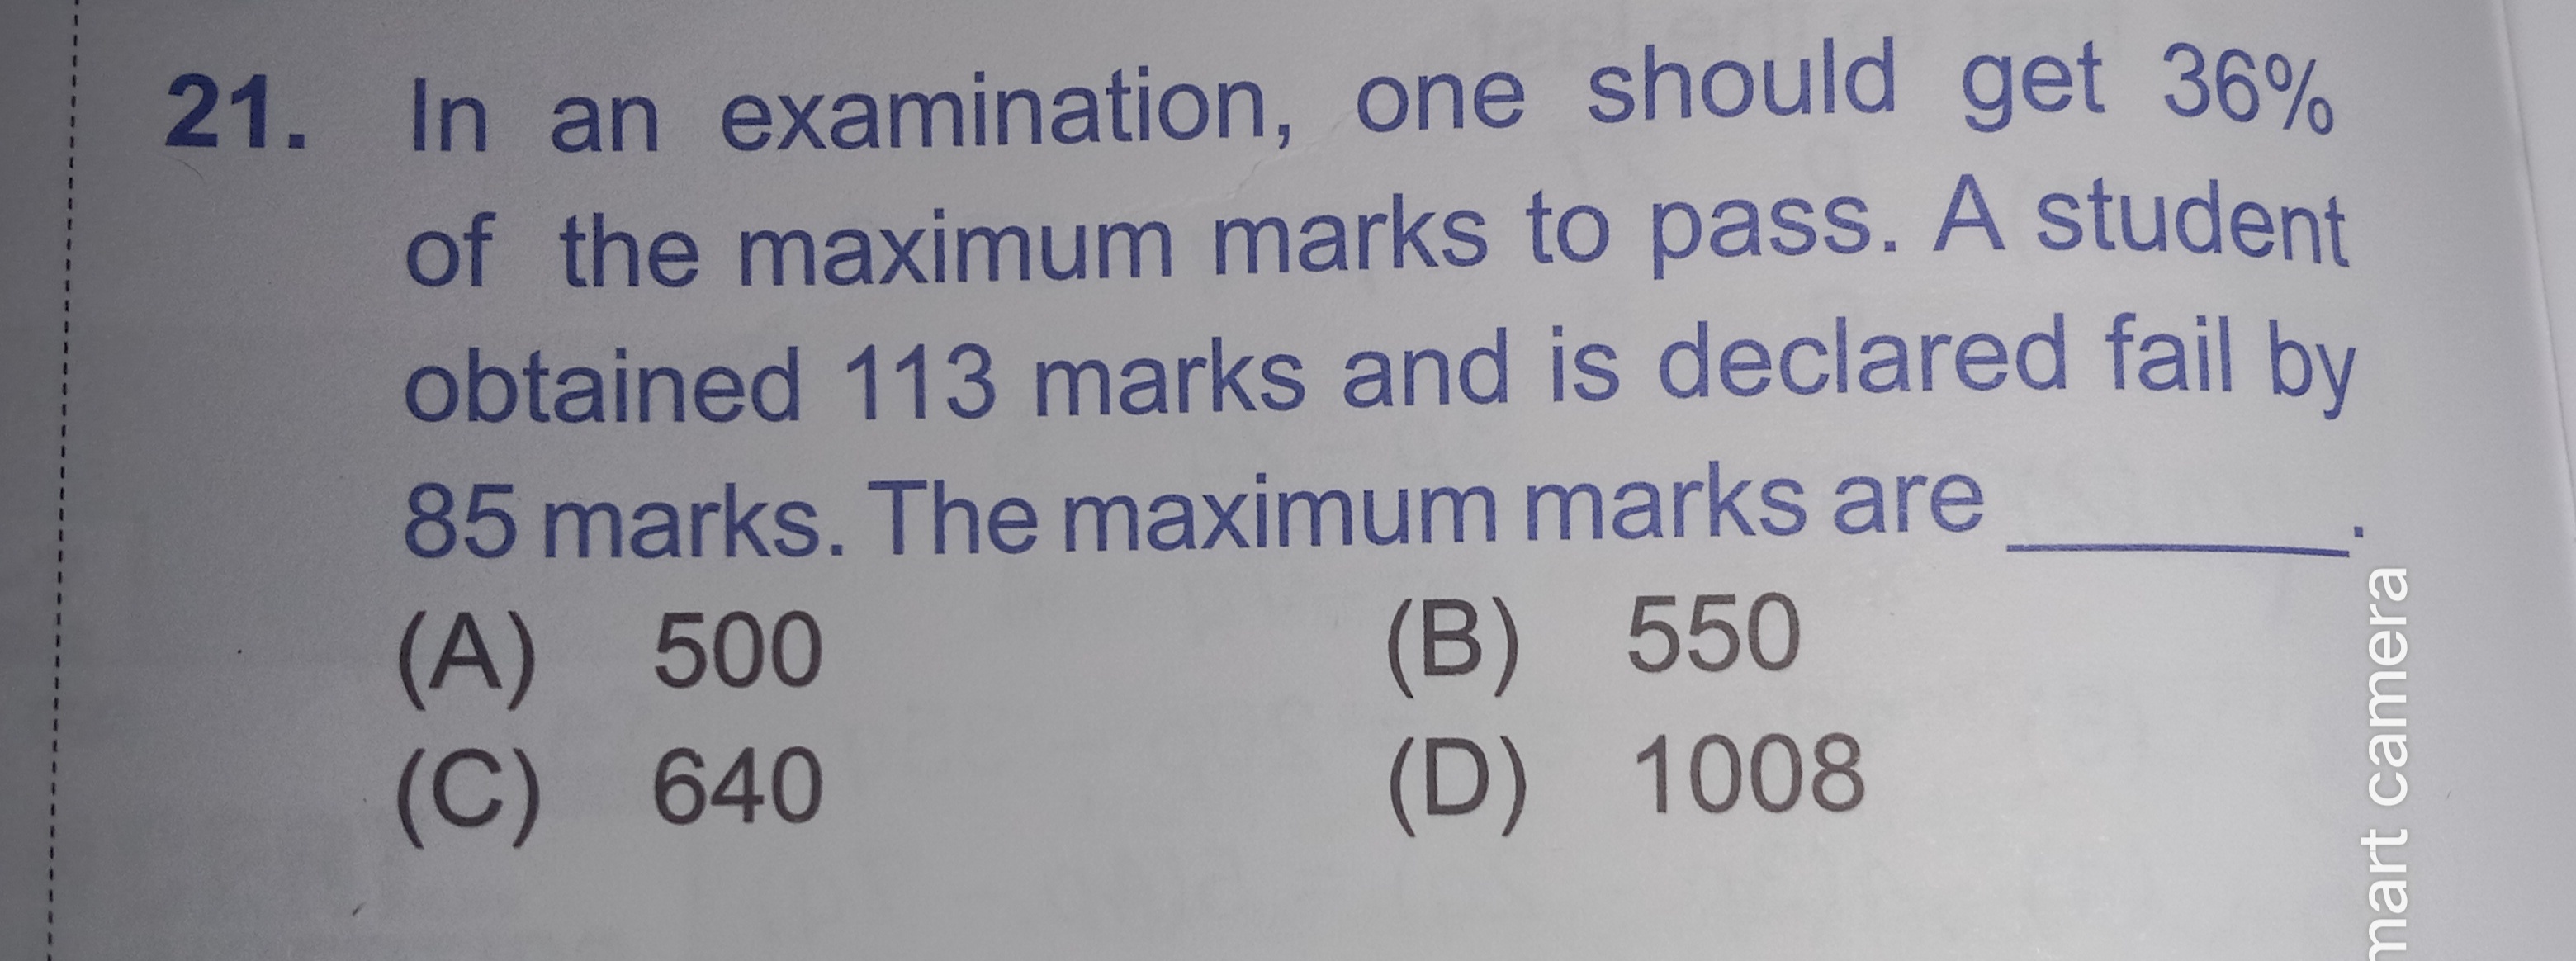 In an examination, one should get 36% of the maximum marks to pass. A 